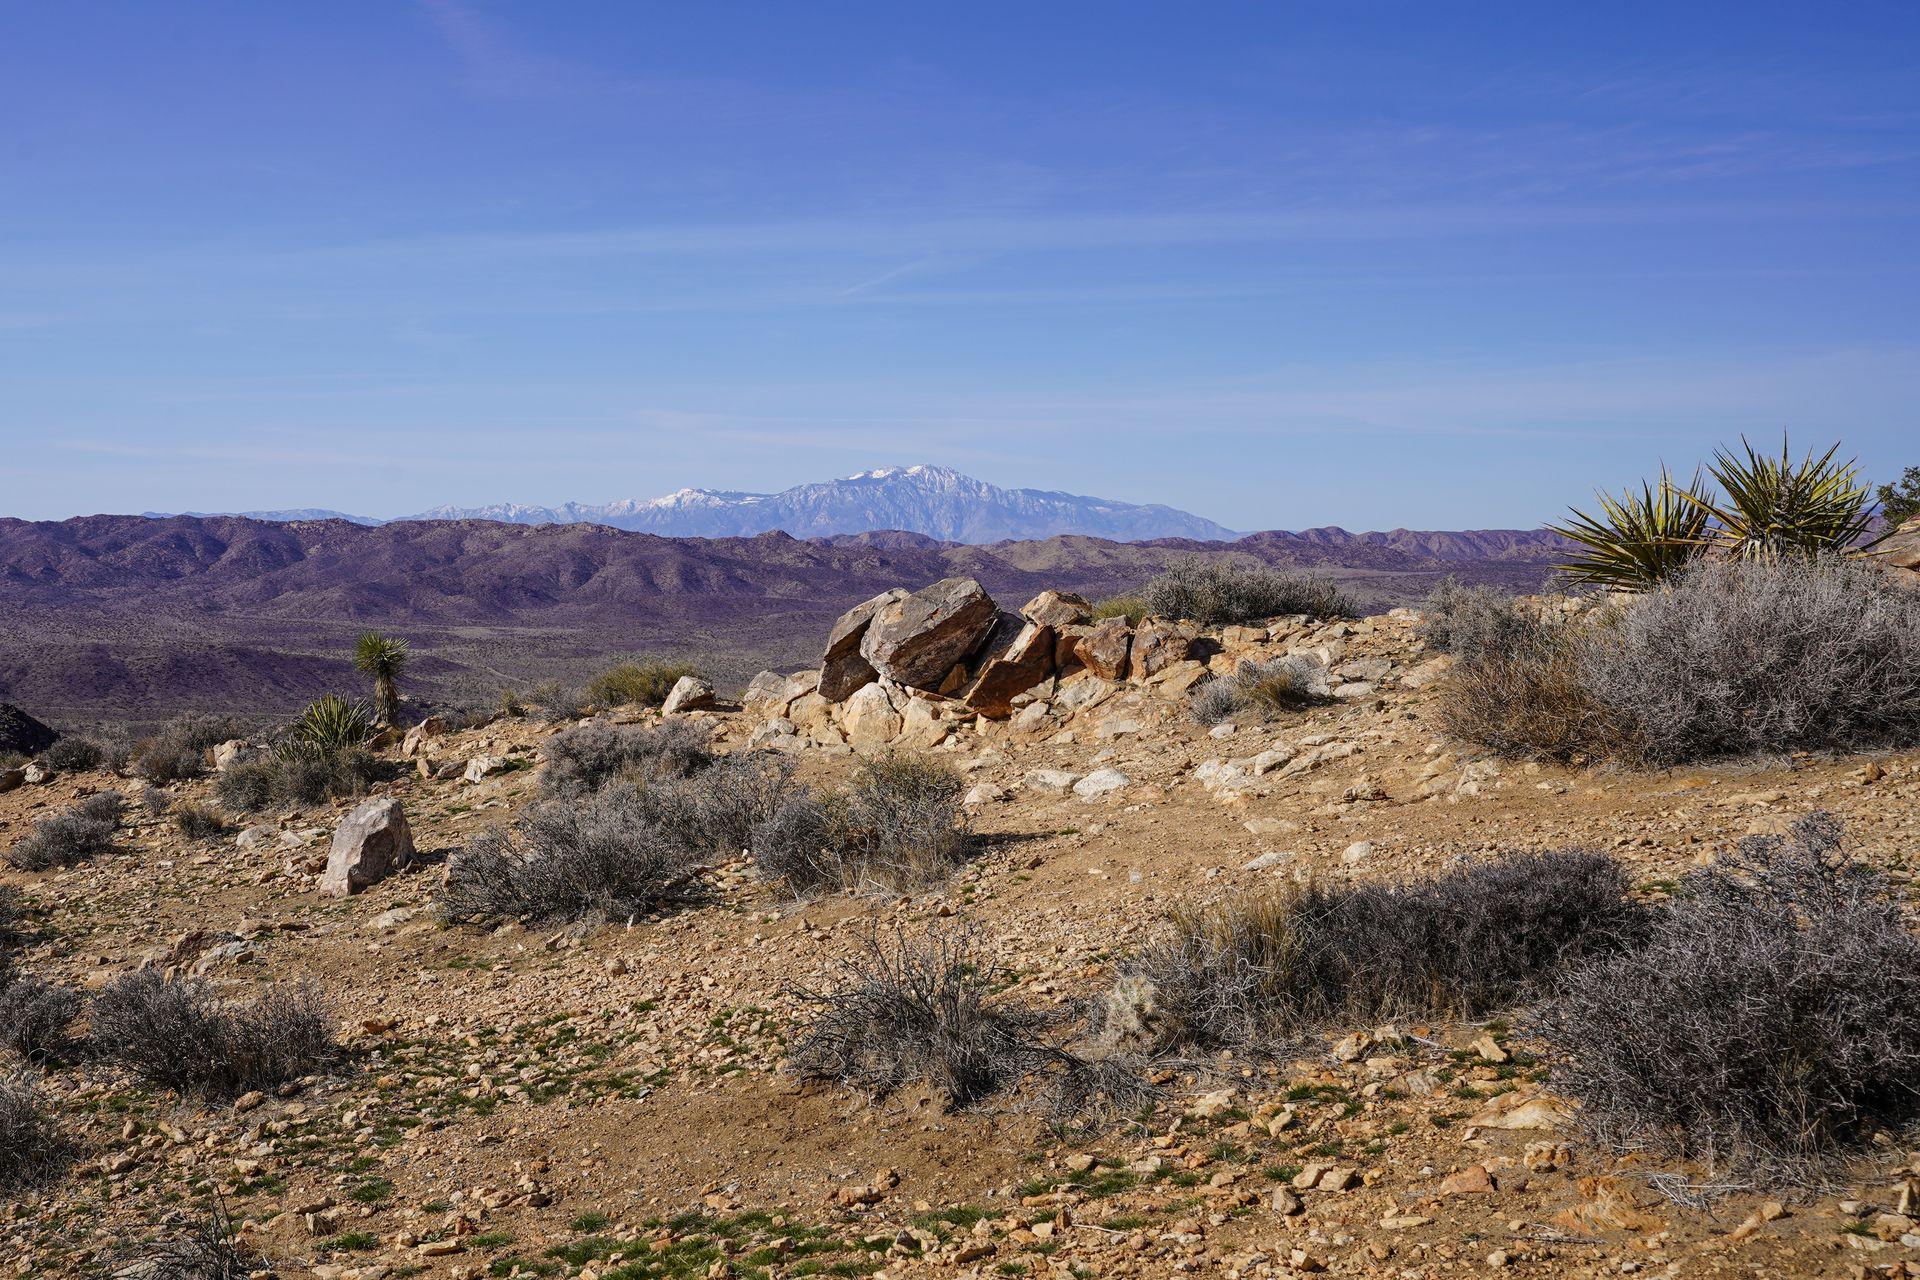 A rocky, desert view with a snowy mountain in the distance.